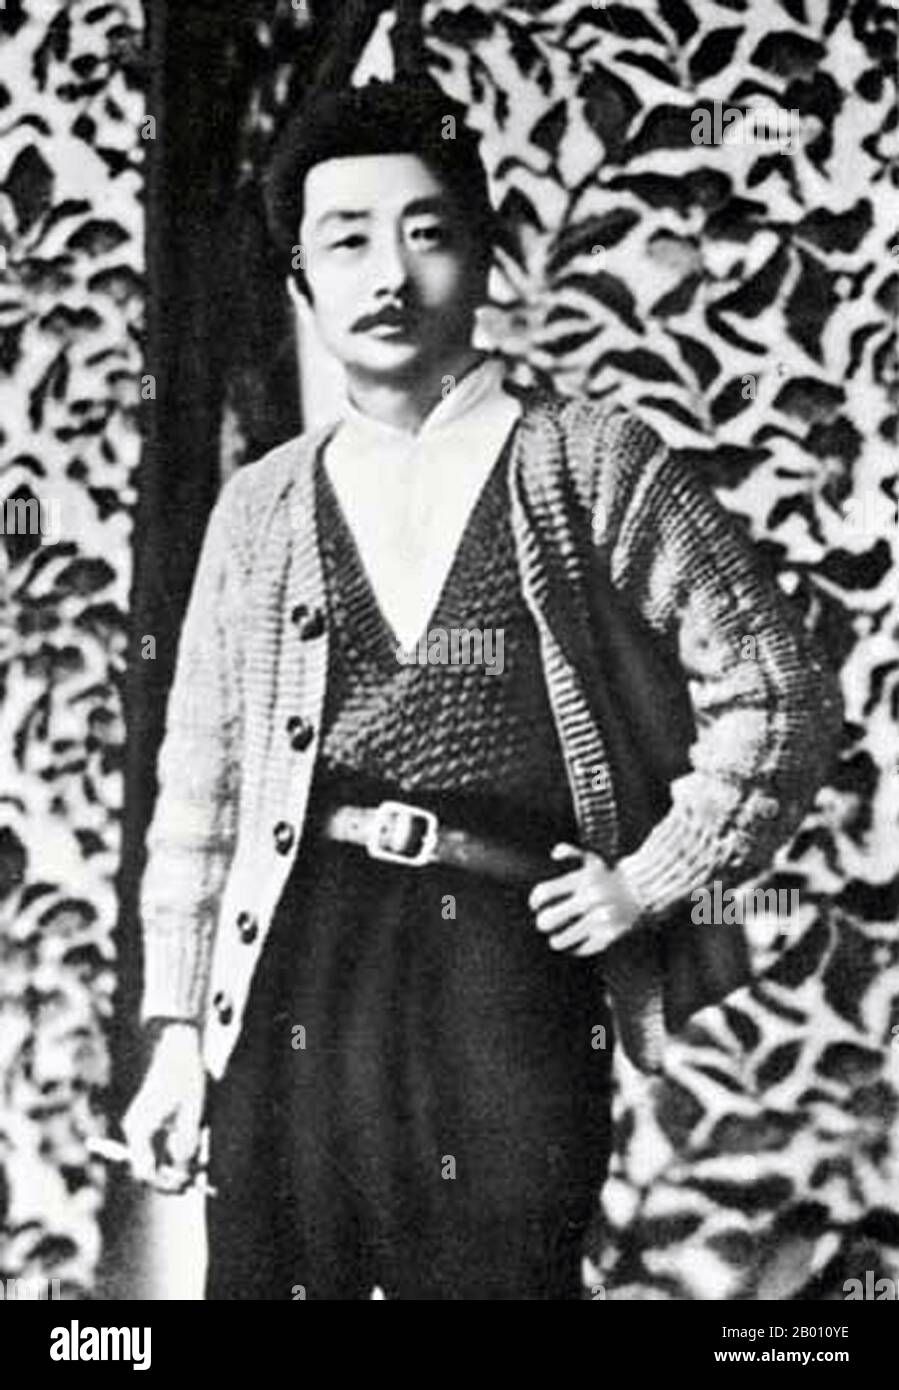 China: The Chinese writer Lu Xun (1881-1936).  Lu Xun (or Lu Hsun), was the pen name of Zhou Shuren (Chou Shu-jen), September 25, 1881 – October 19, 1936. One of the major Chinese writers of the 20th century. Considered by many to be the founder of modern Chinese literature, he wrote in baihua (the vernacular) as well as classical Chinese. Lu Xun was a short story writer, editor, translator, critic, essayist and poet. In the 1930s he became the titular head of the Chinese League of the Left-Wing Writers in Shanghai. Stock Photo